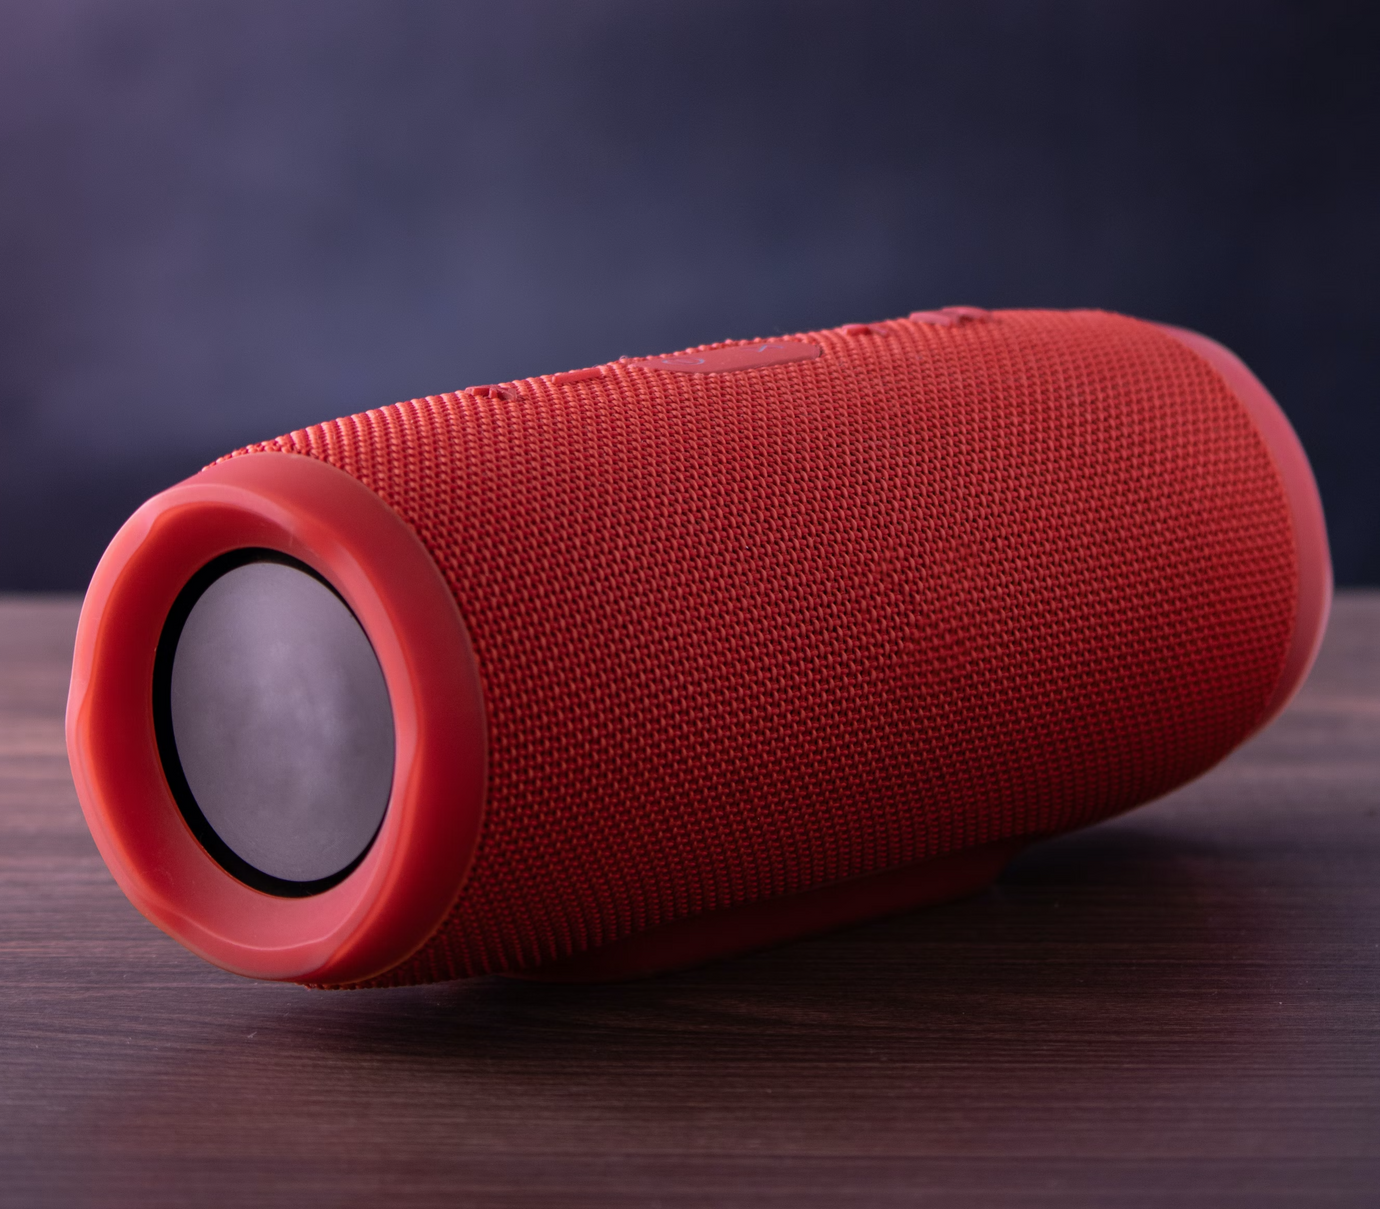 Red portable Blue Tooth speaker on a table